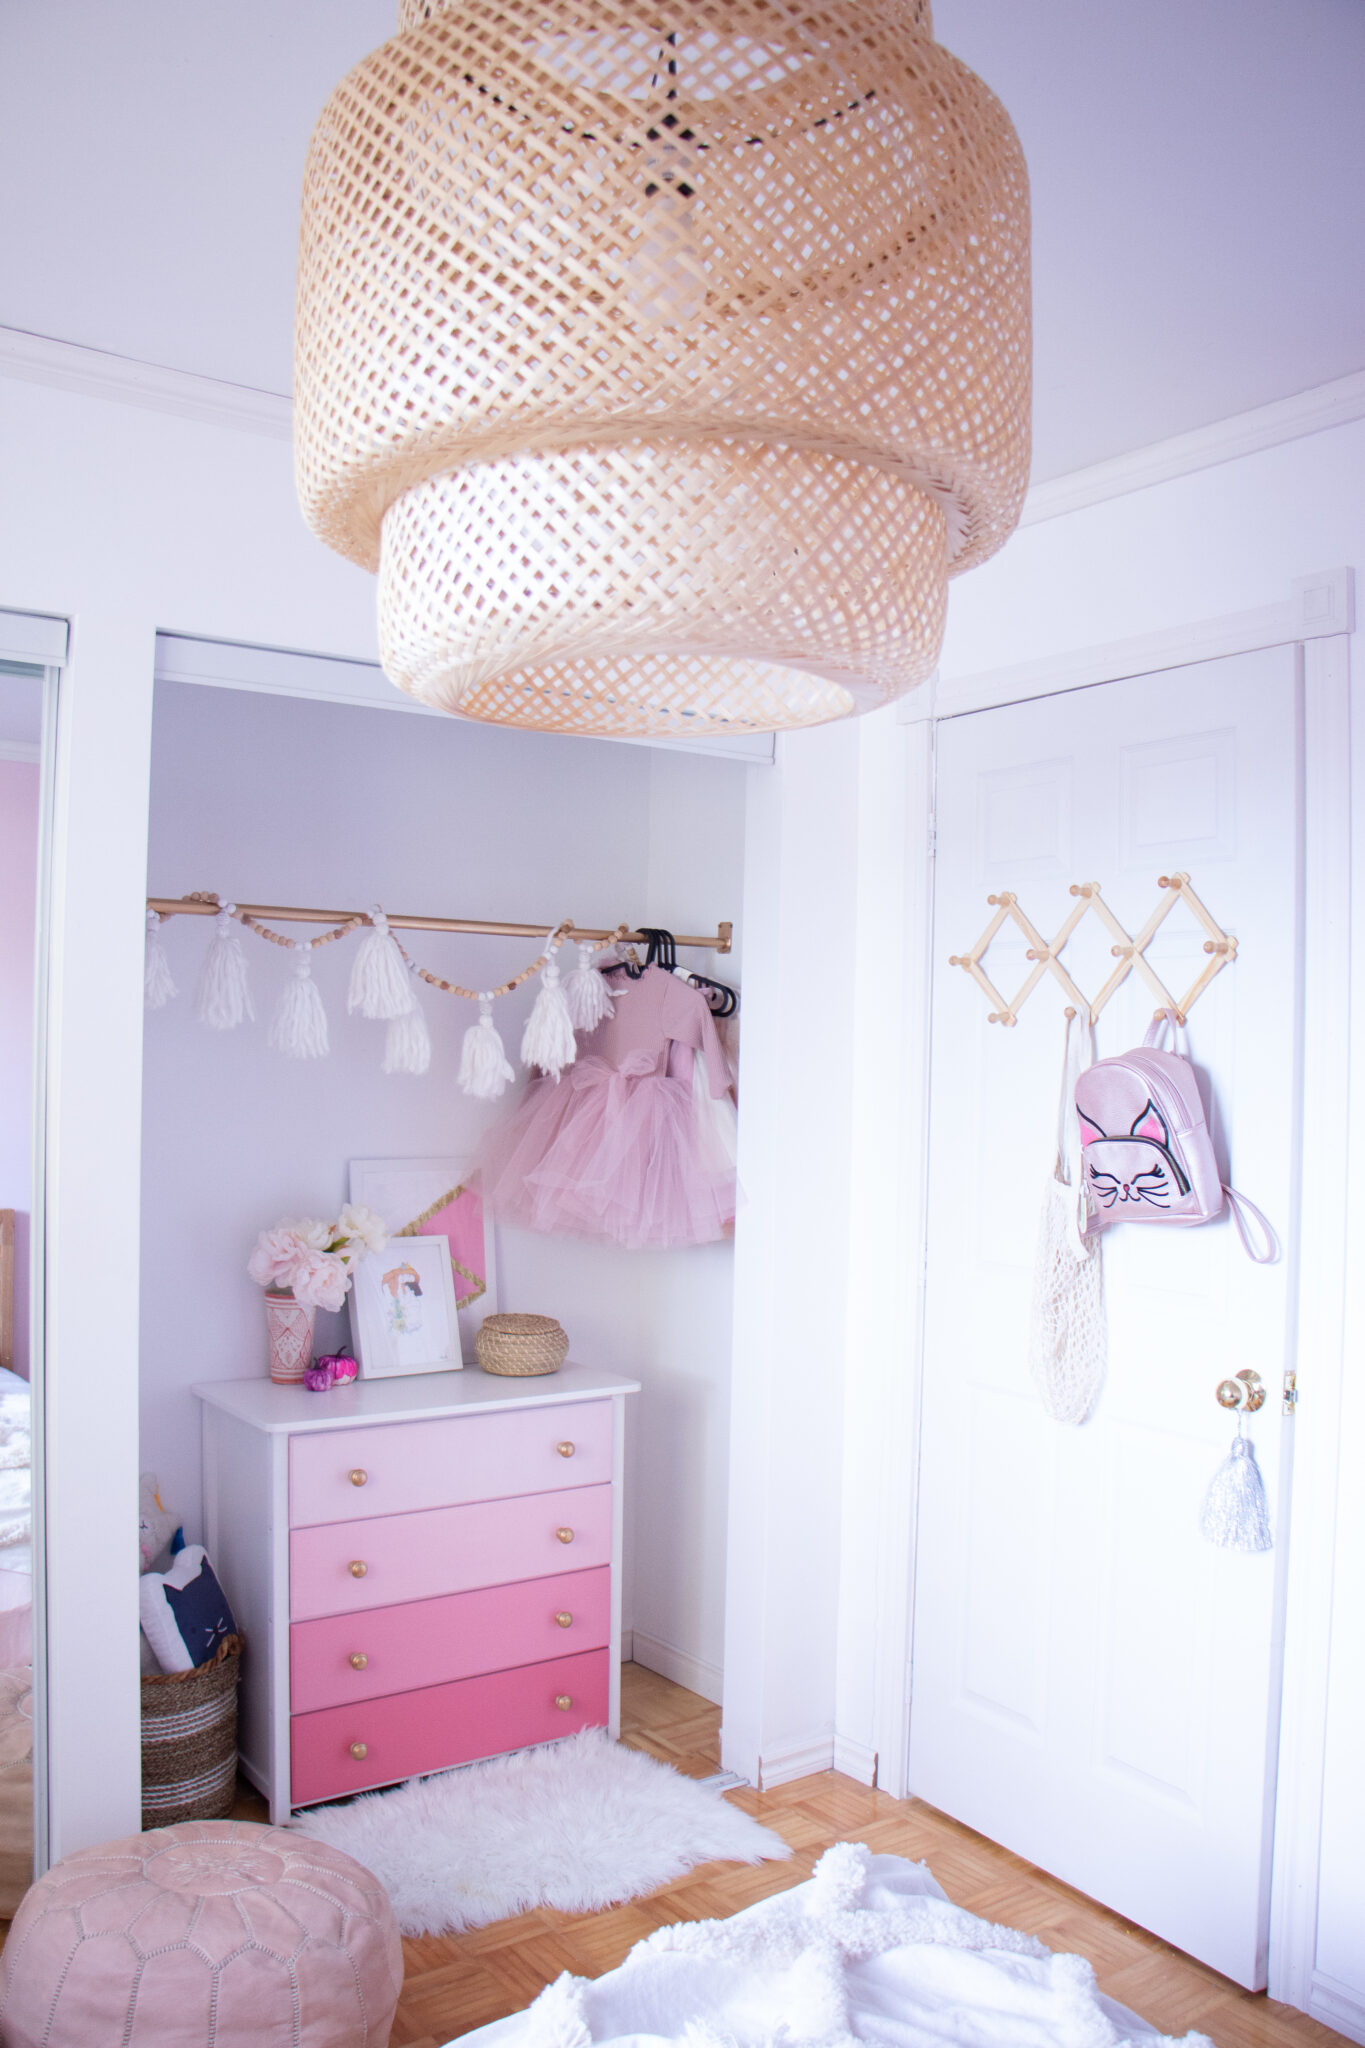 Unusual Ideas To Make A Child’s Bedroom Stand Out